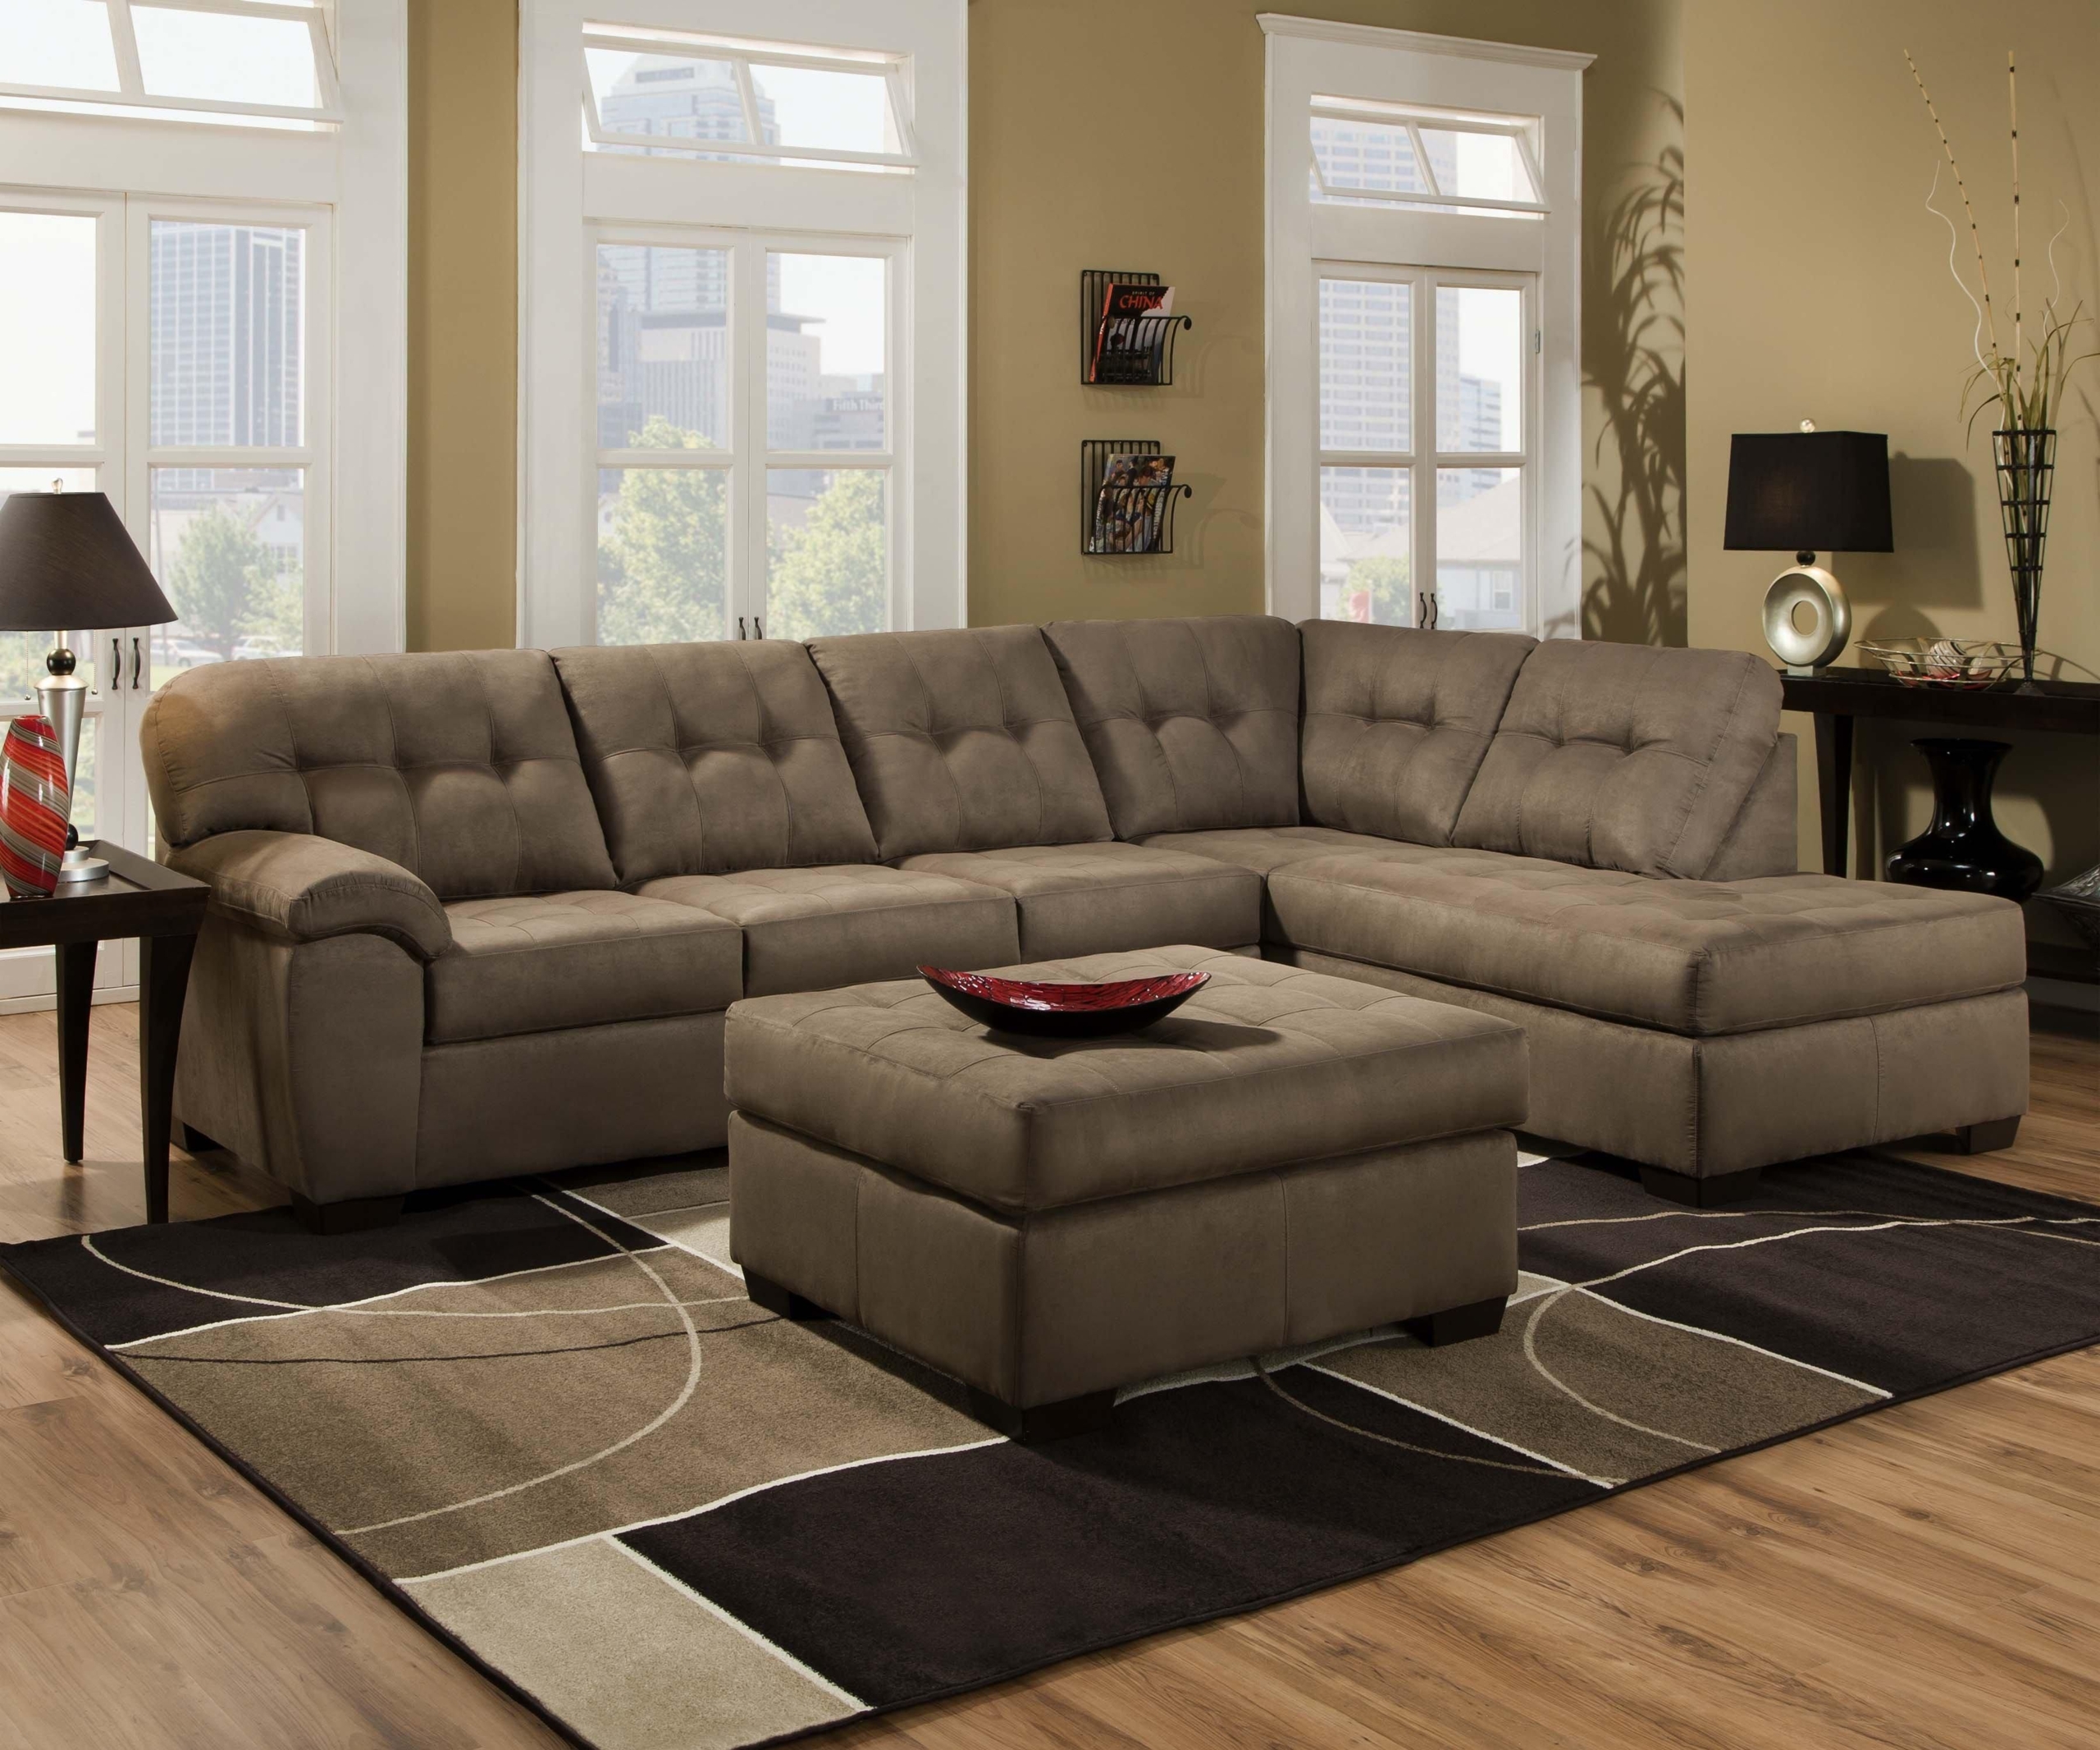 Simmons upholstery sectional